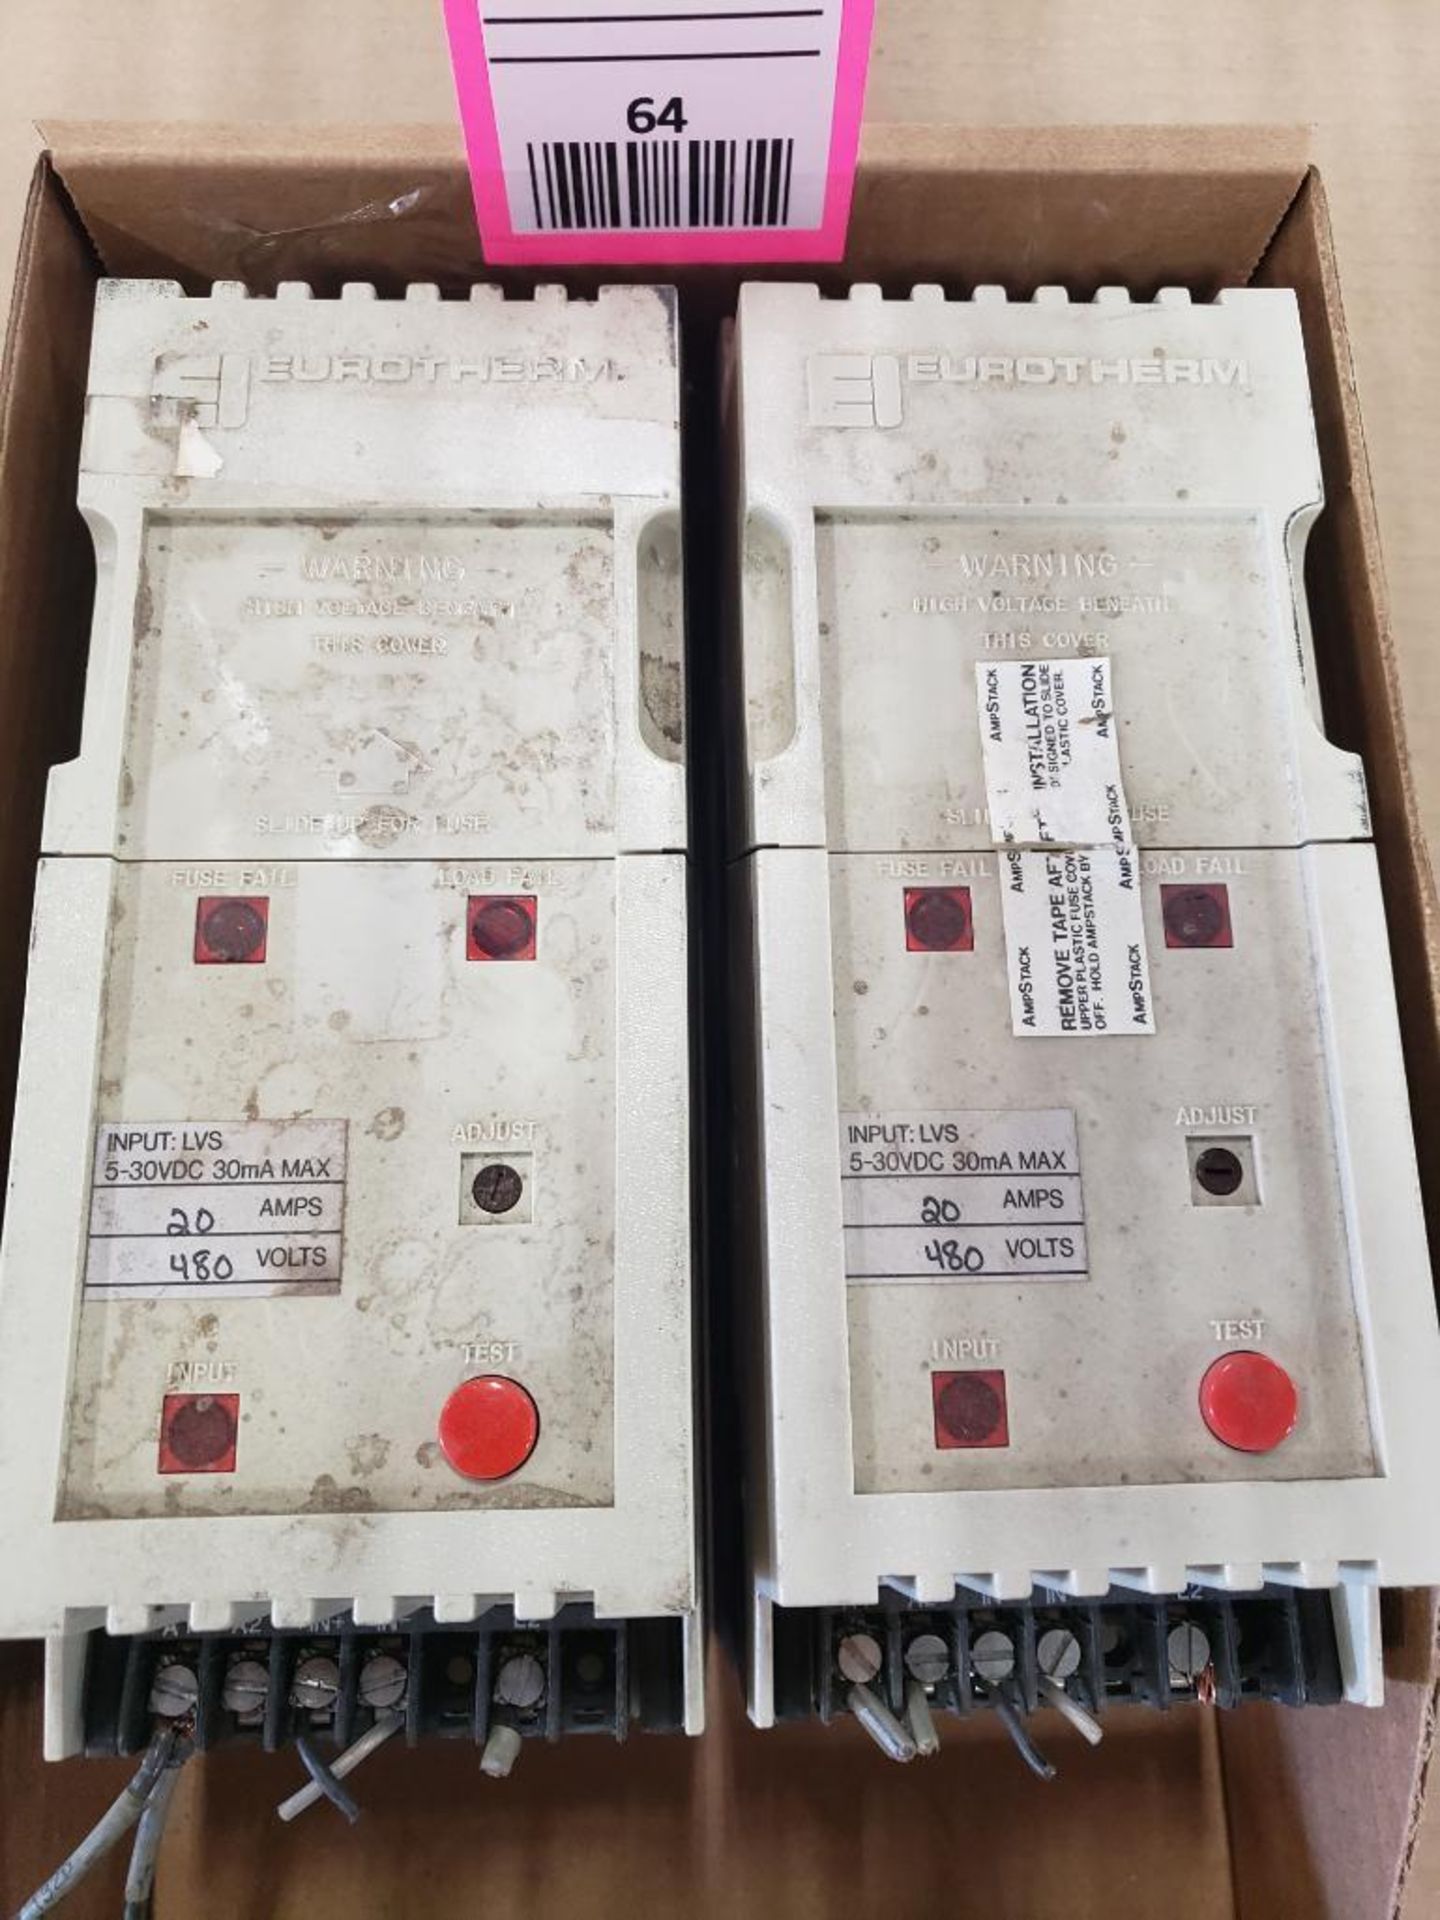 Qty 2 - Eurotherm AmpStack 20A480V/LVS/PLF power controller. - Image 2 of 4